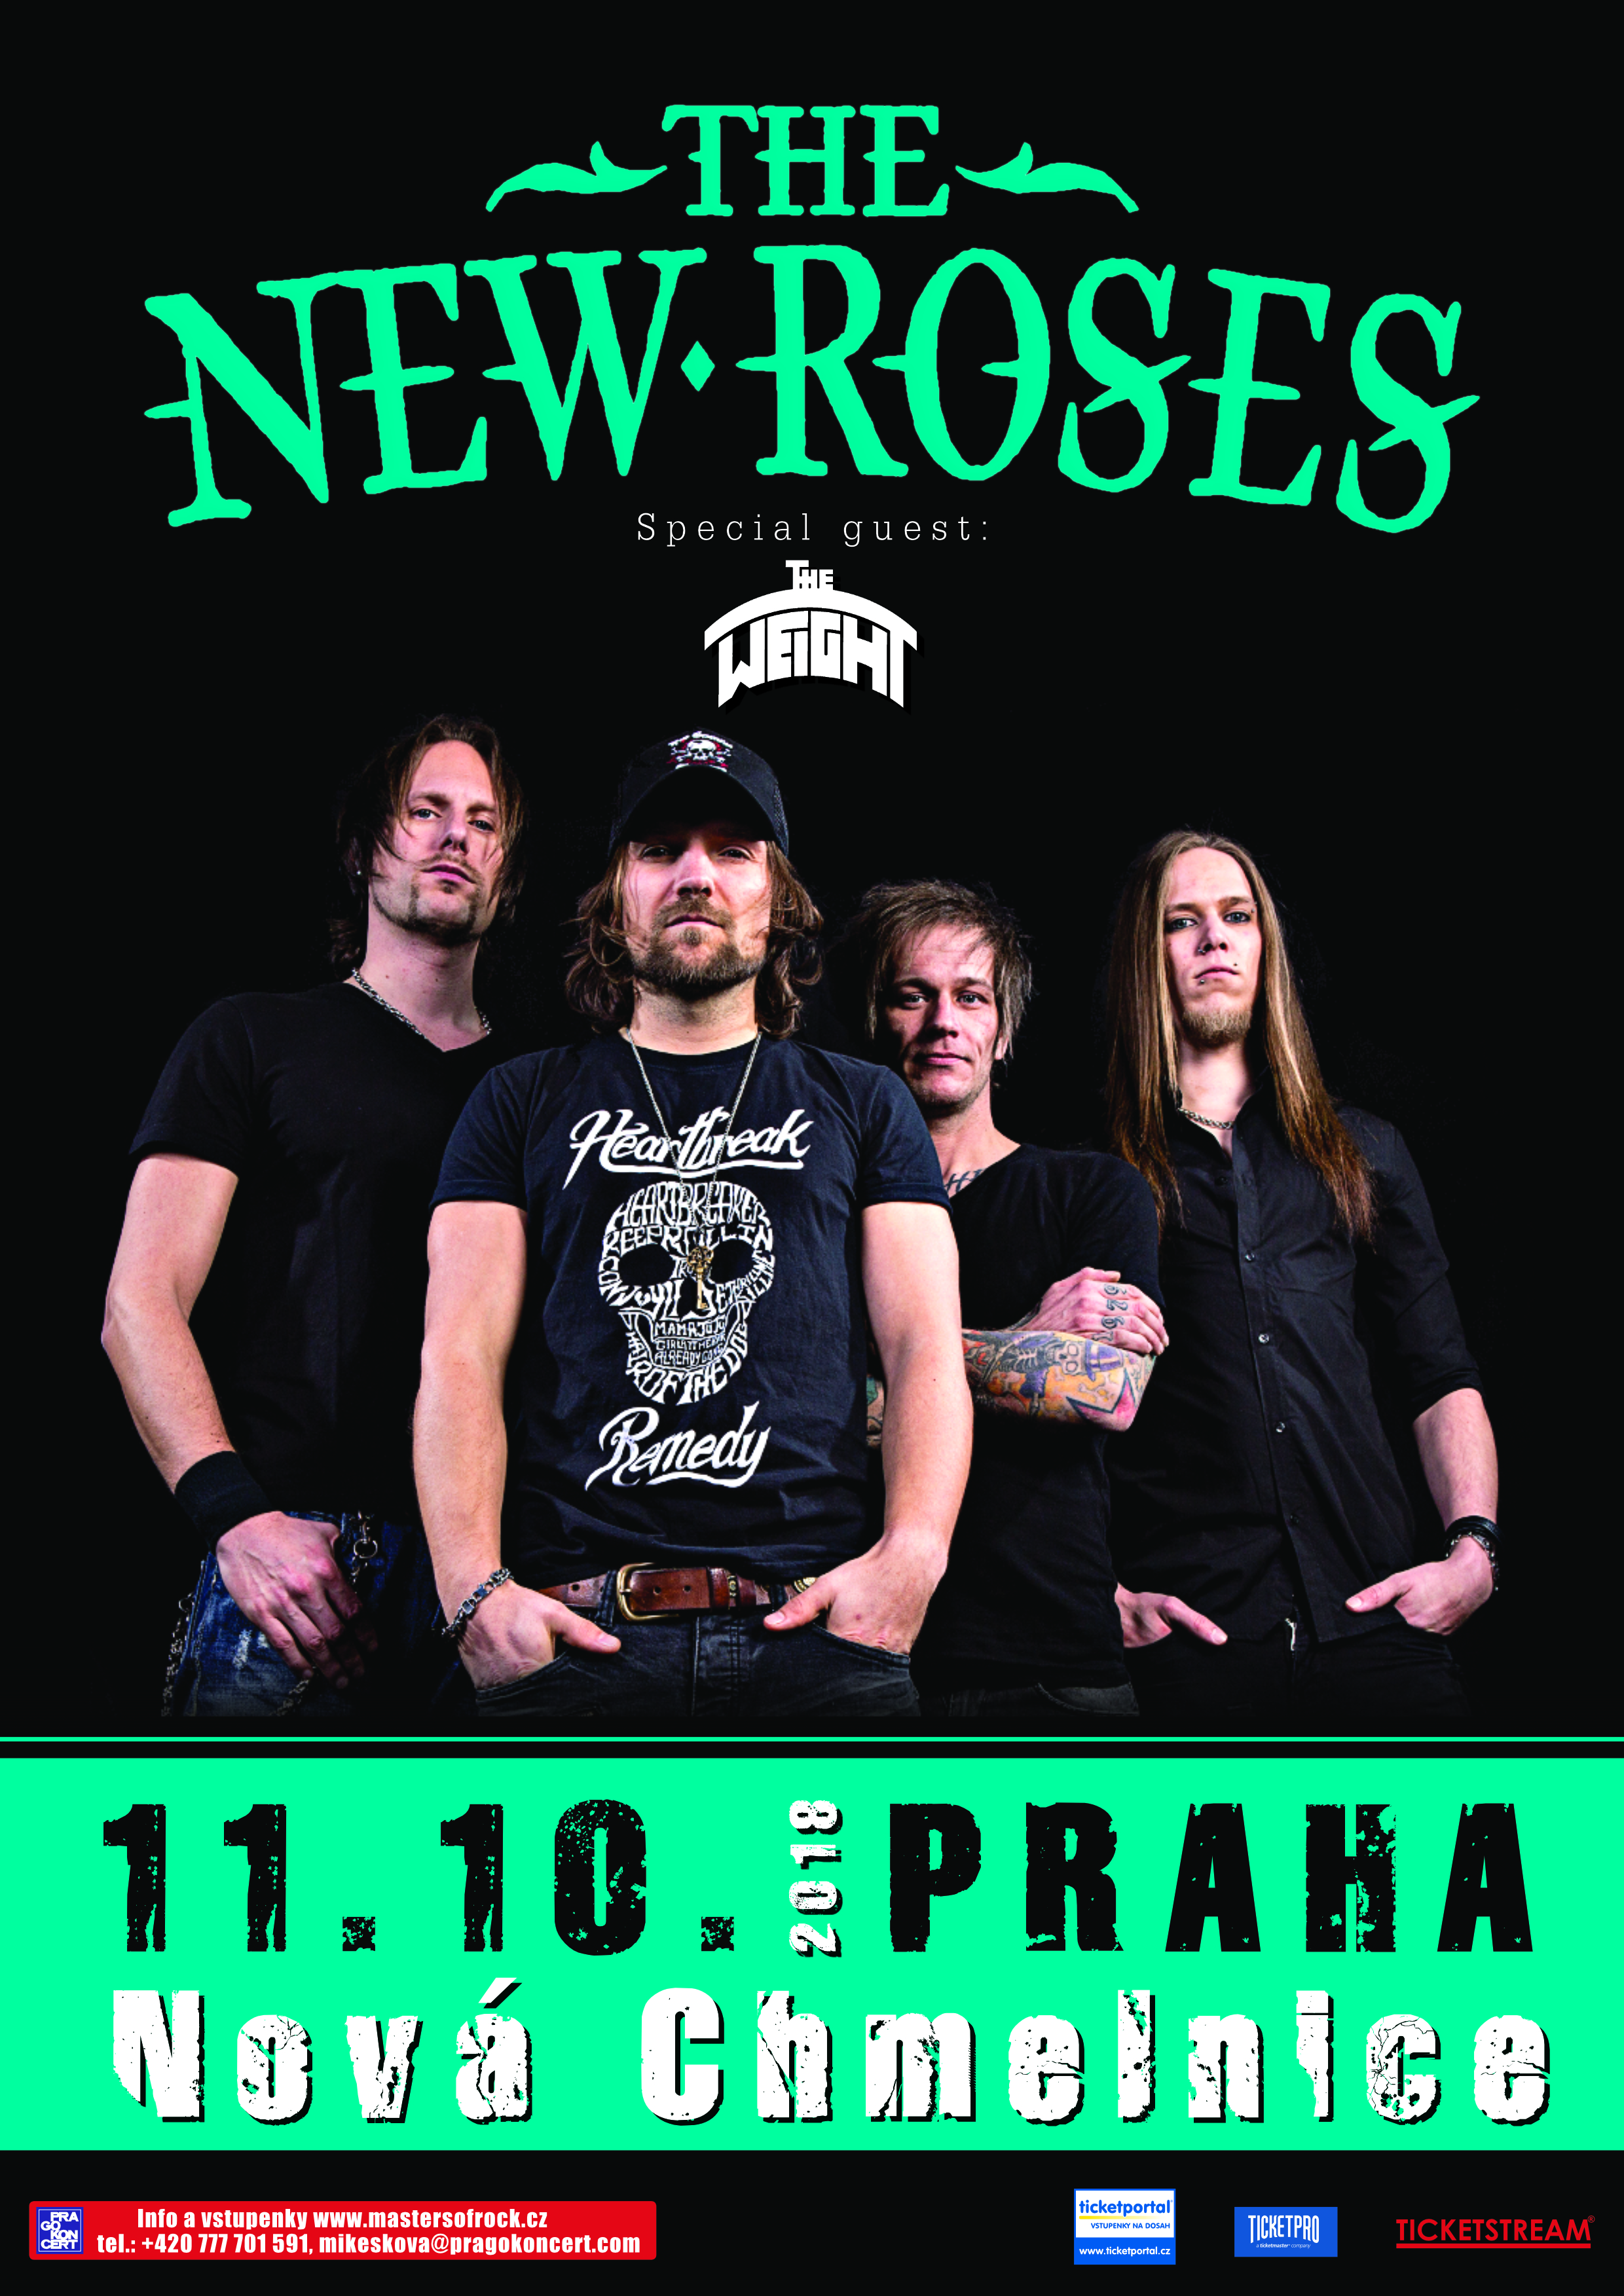 The new roses. The New Roses группа. Группа the New Roses ВКО.